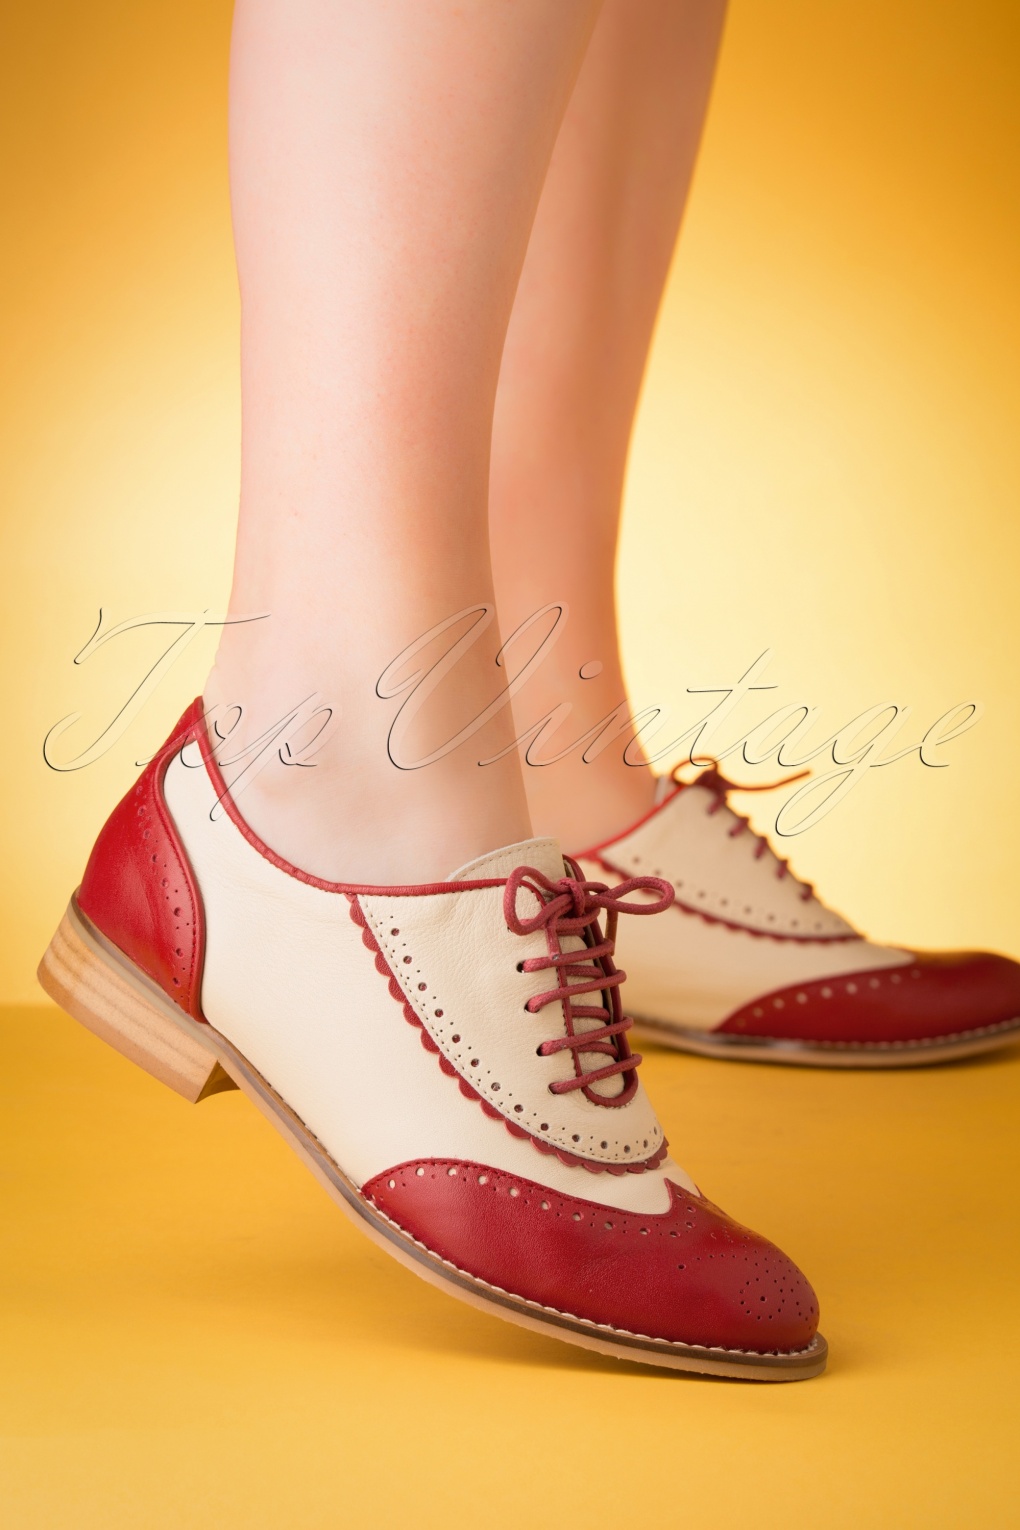 red and white oxford shoes